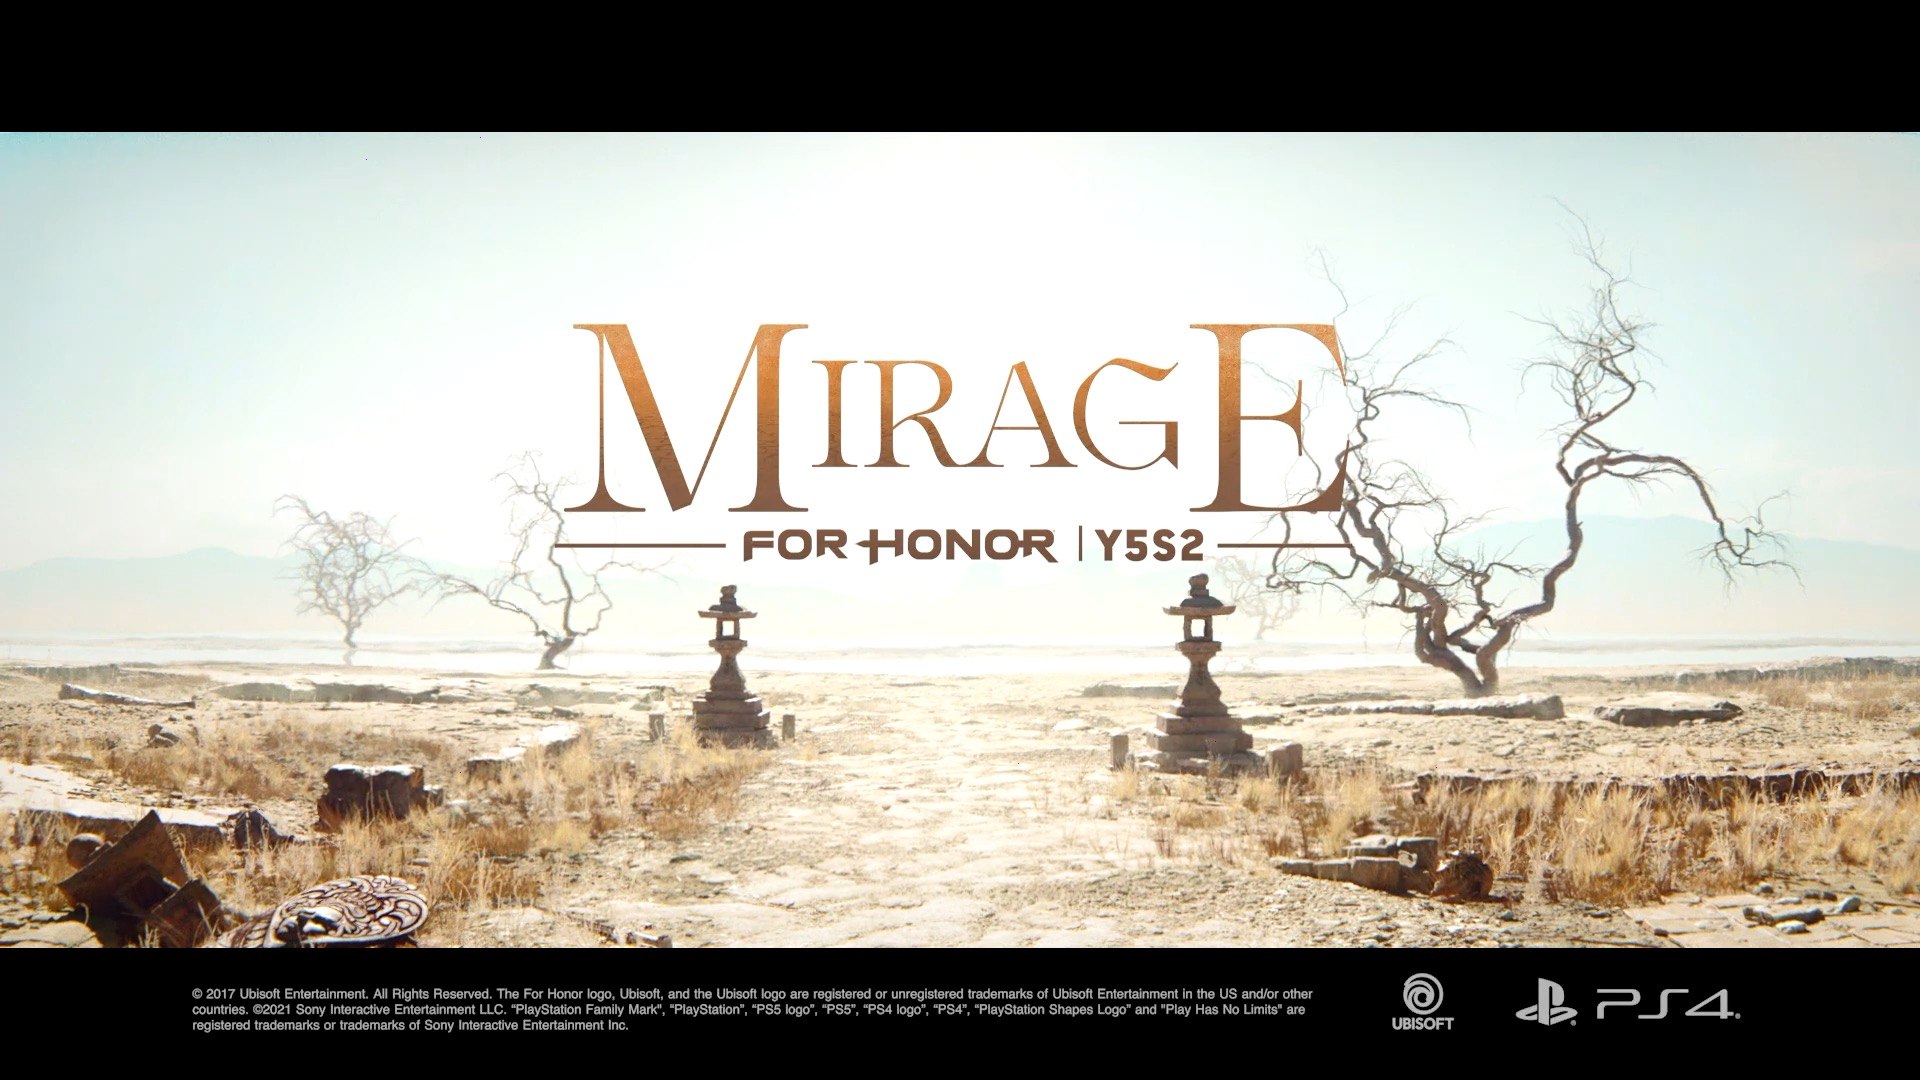 For Honor Mirage Wallpapers